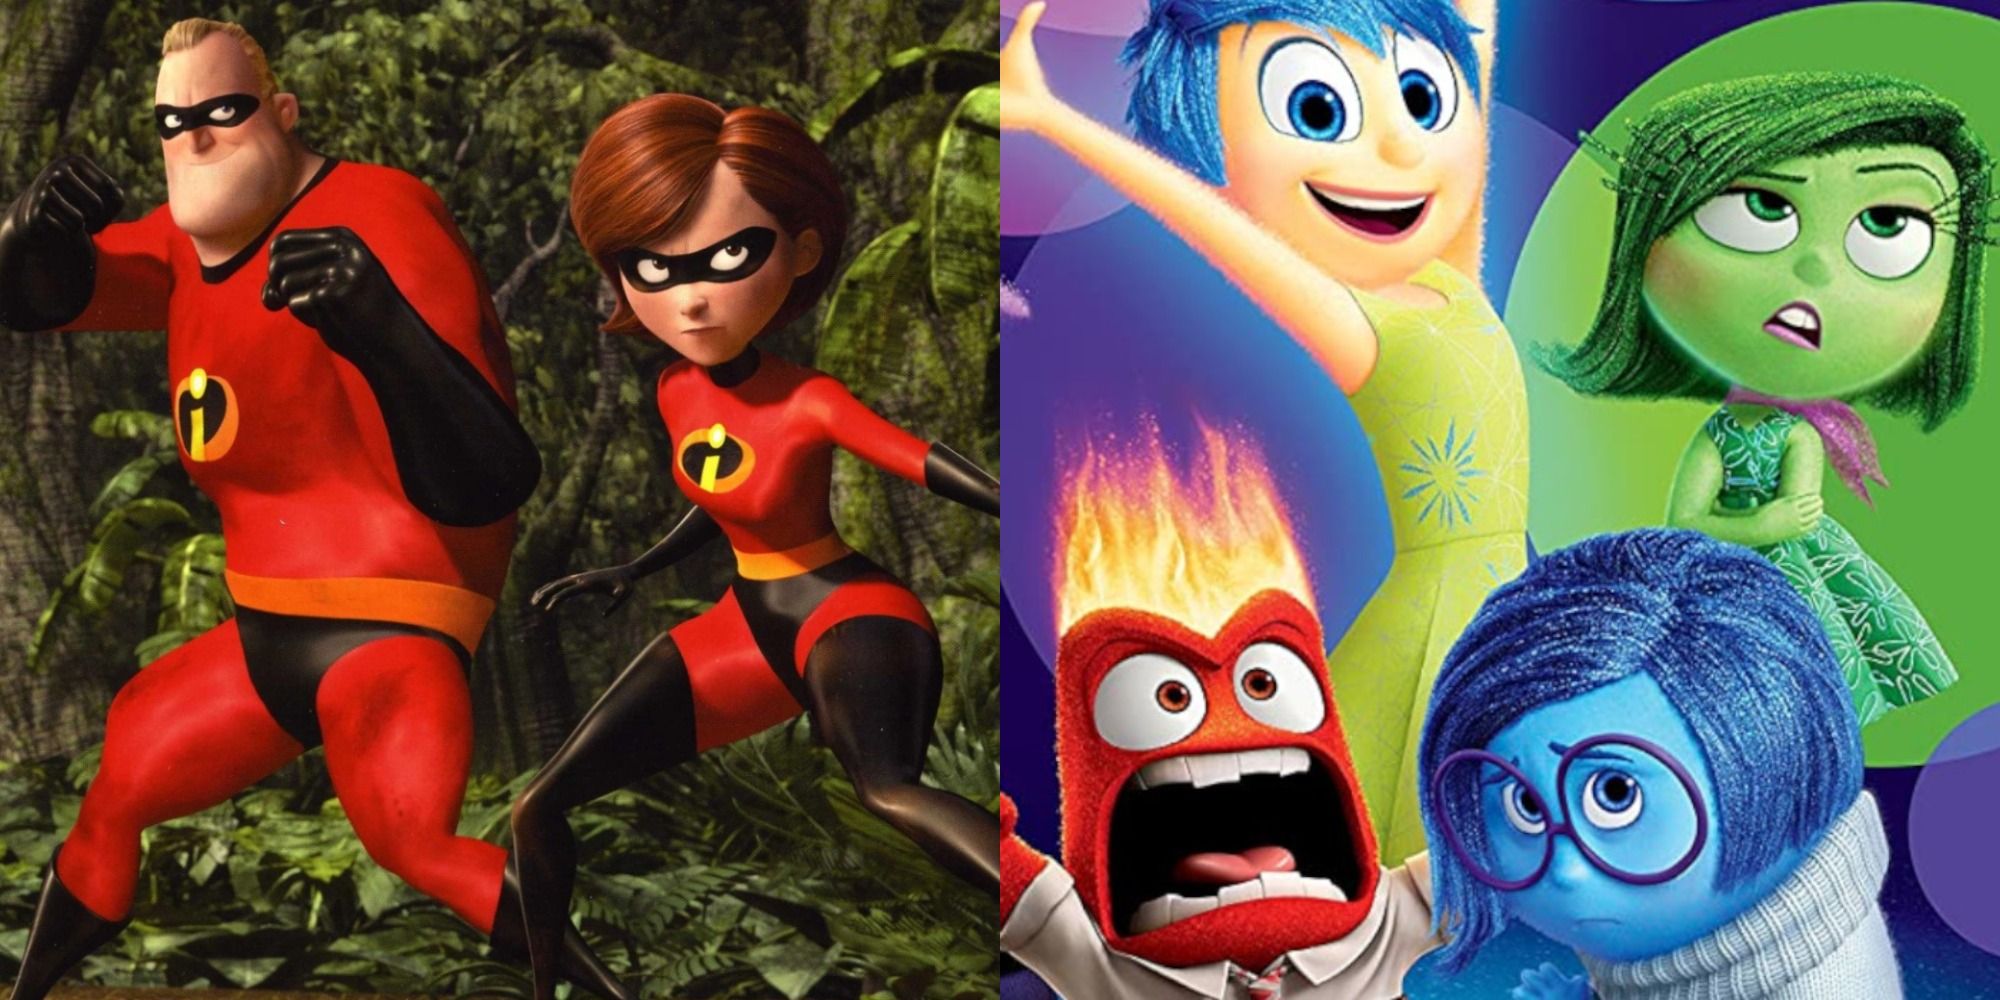 The Incredibles and Inside Out